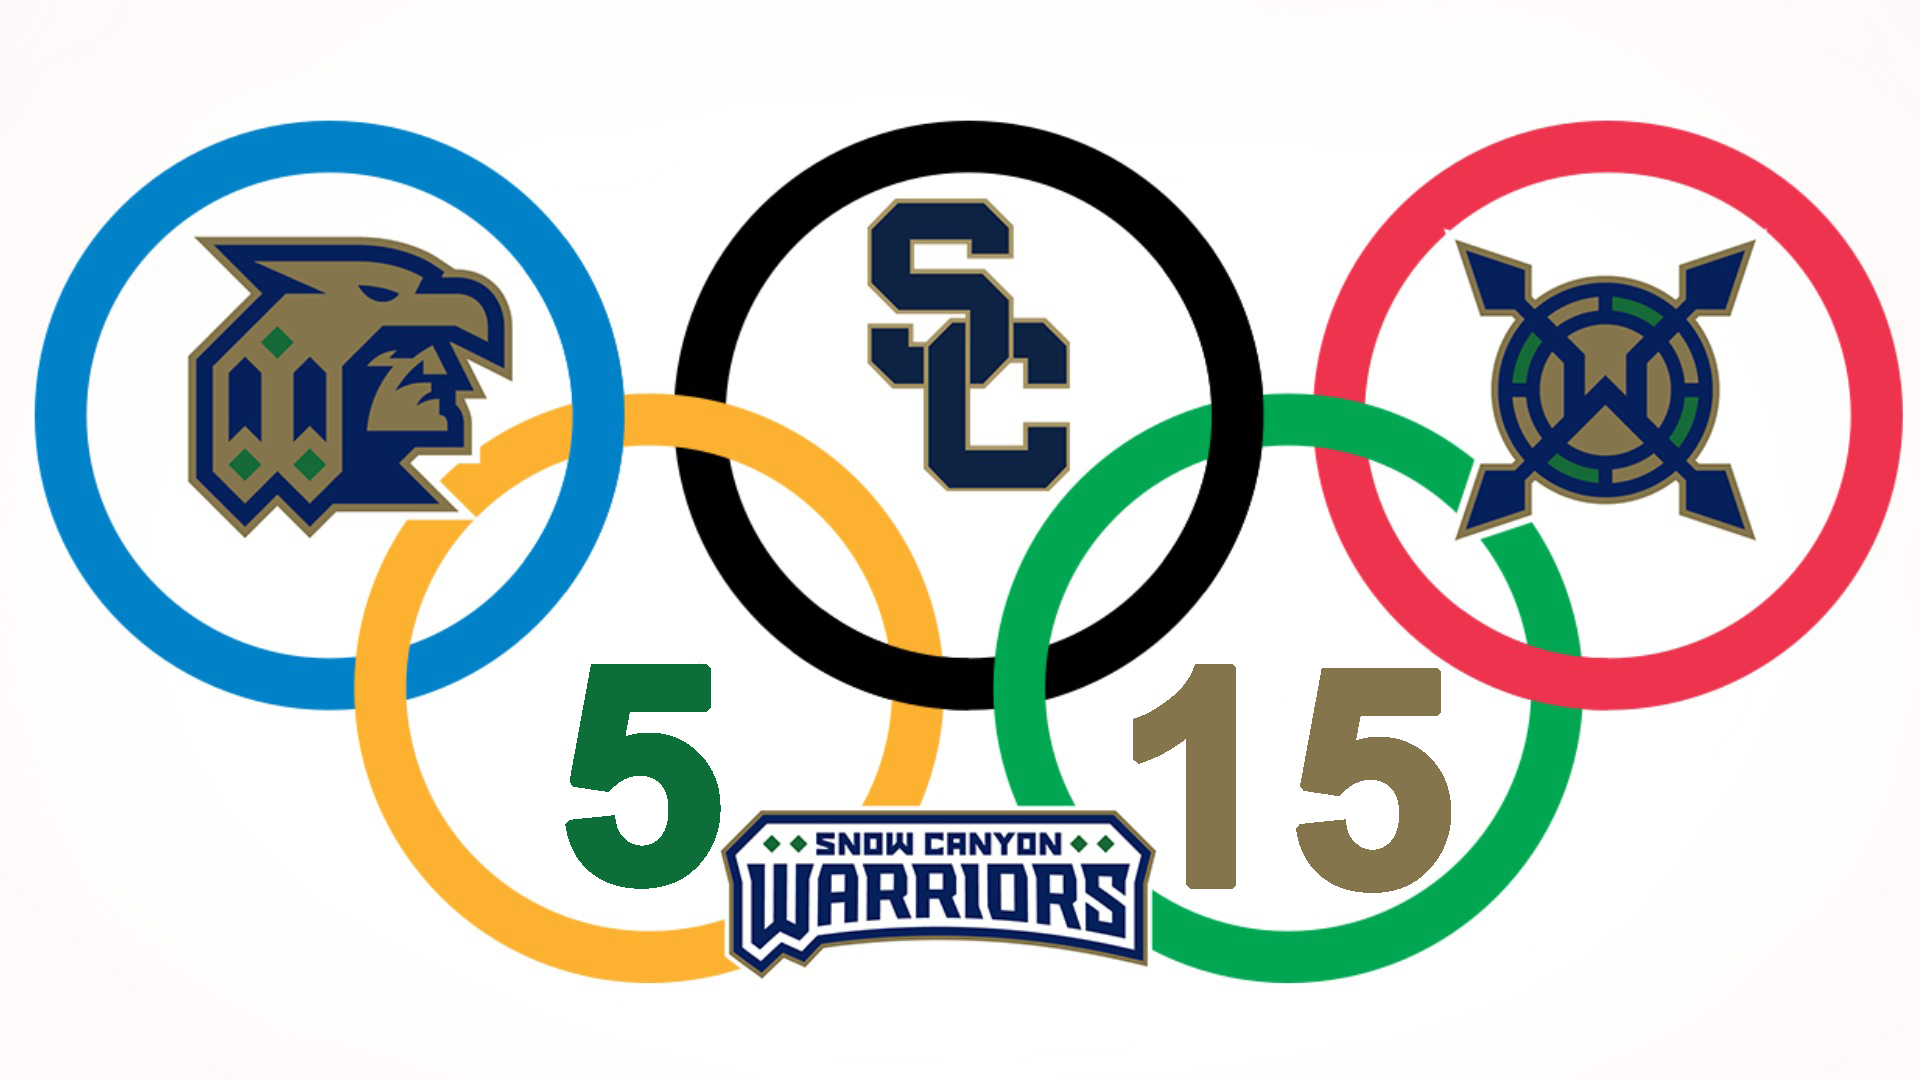 Warrior Olympic rings